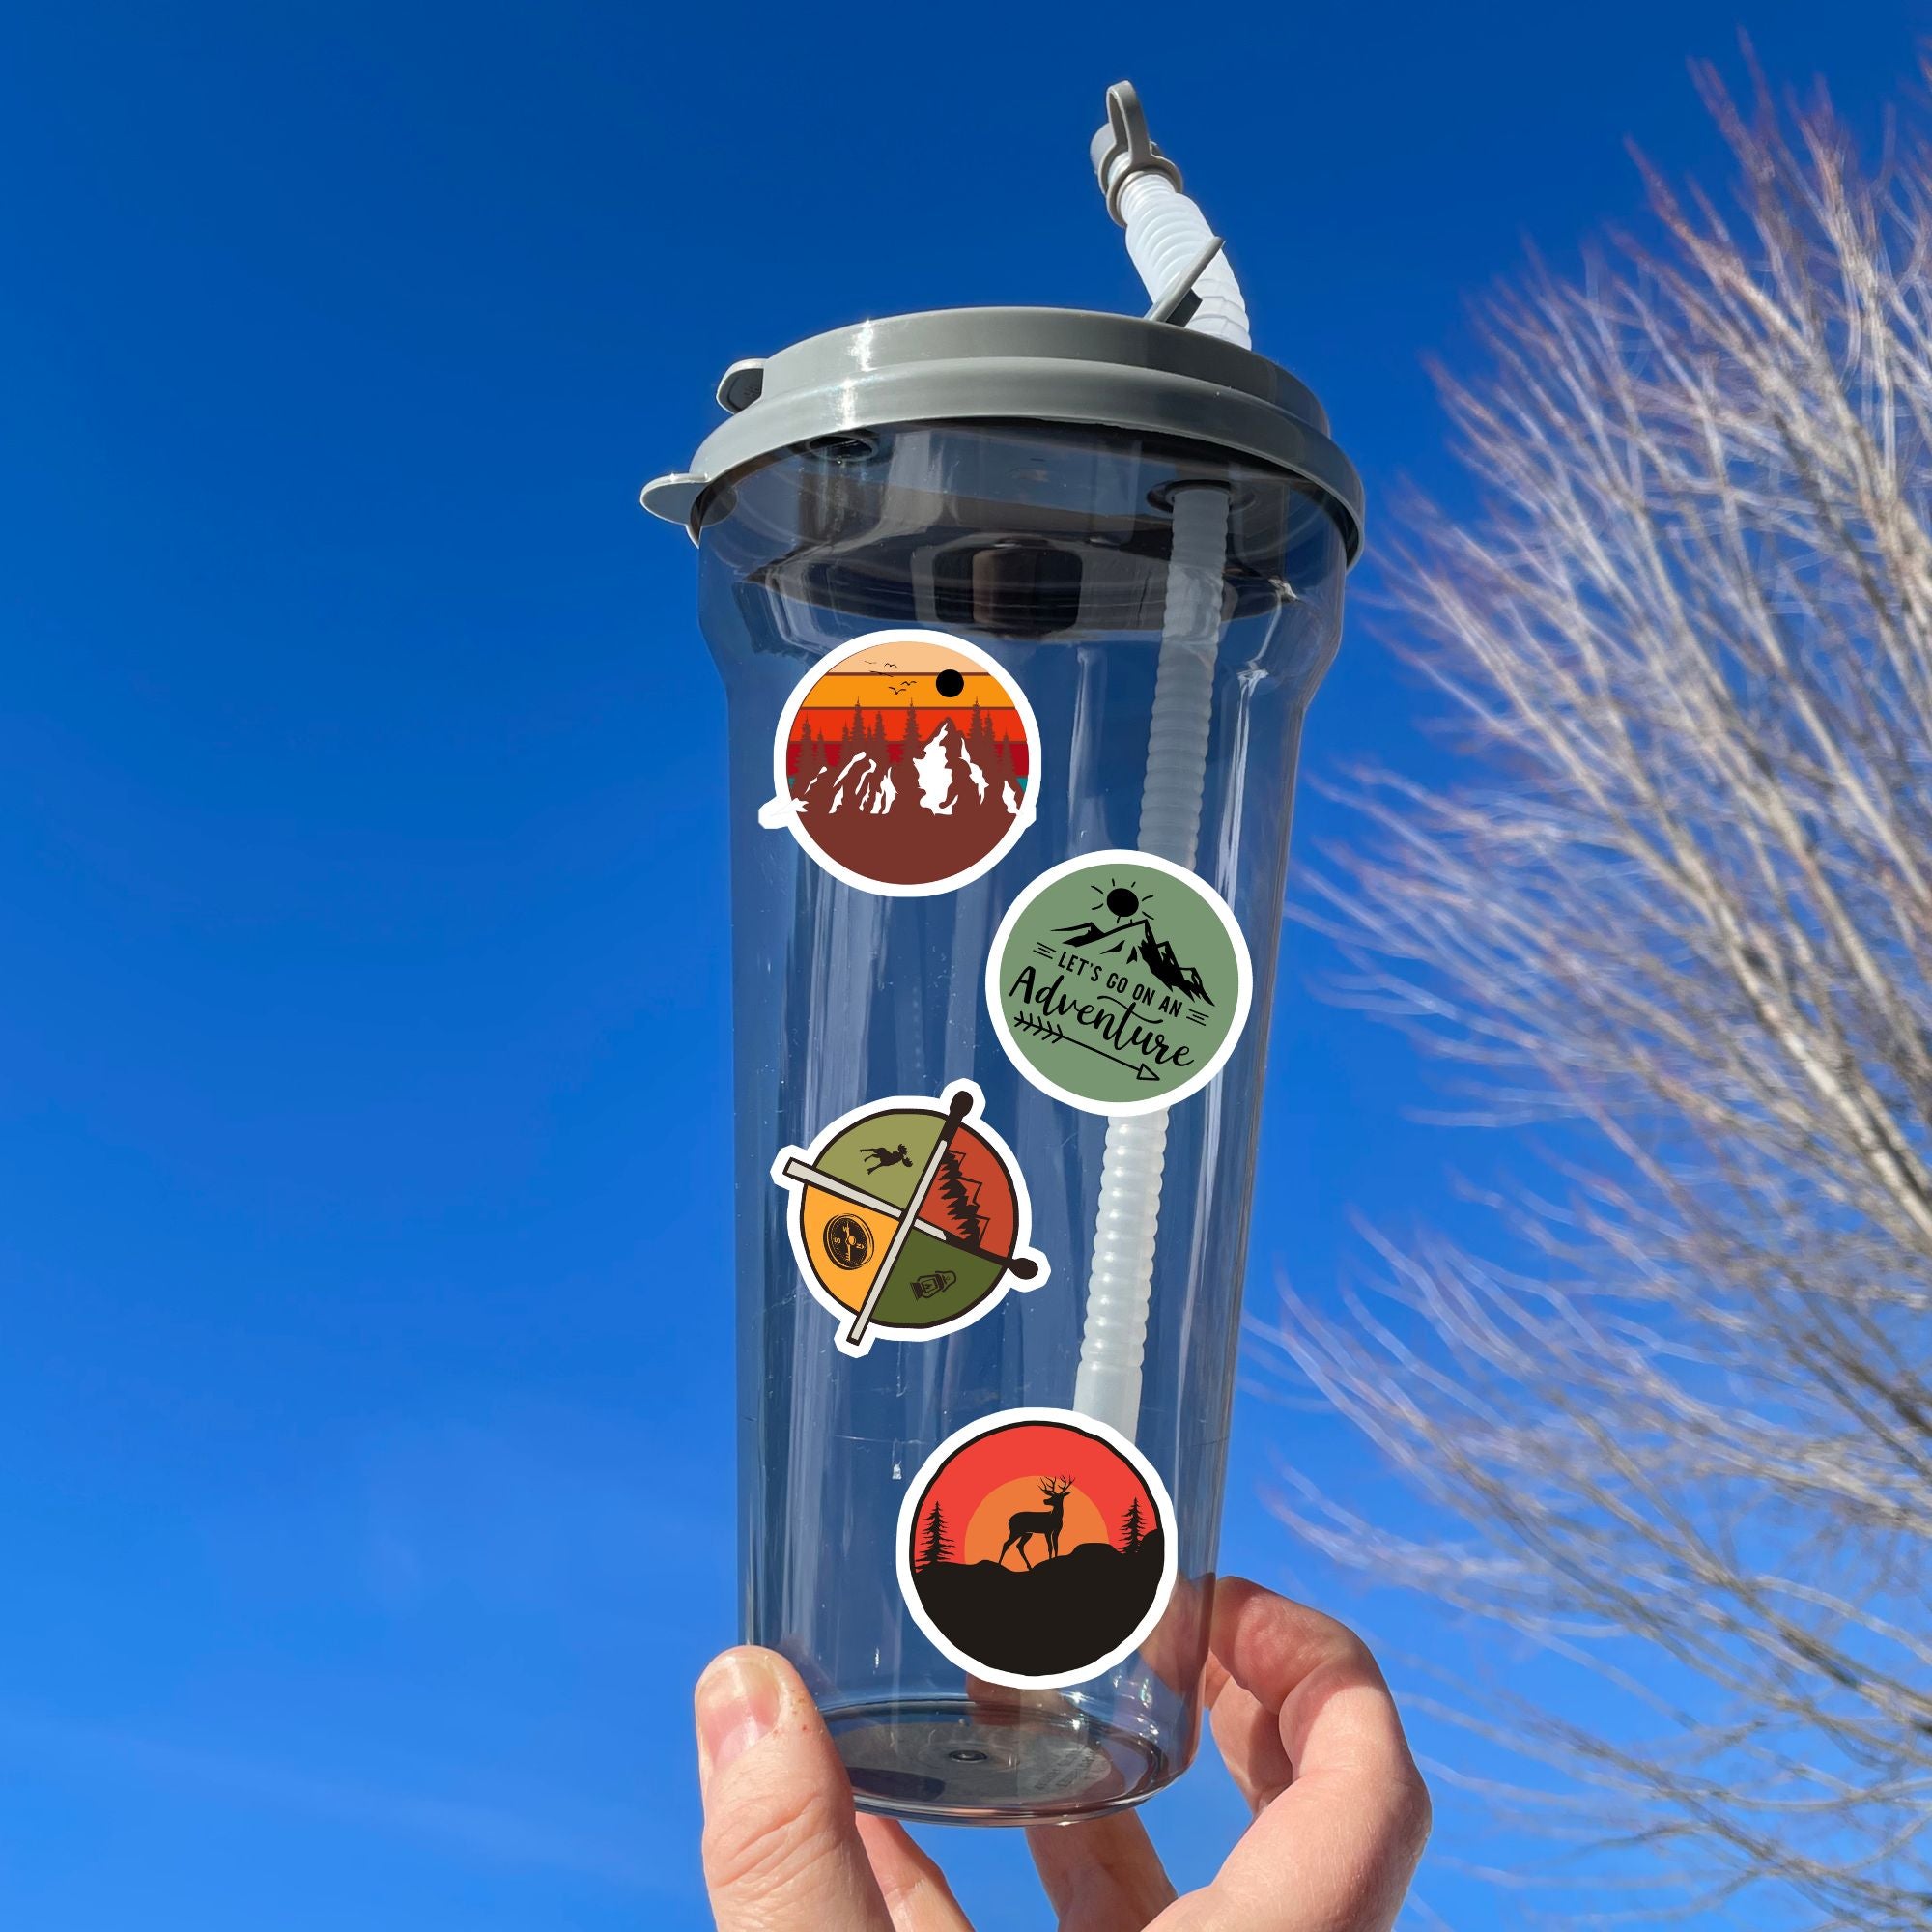 Tie up your boots and enter the wild with this sticker sheet! This sticker sheet has twelve different stickers showing different outdoor activities. From the mountains to camping to climbing this set is perfect for any outdoors person. This image is of a water bottle with four different outdoor stickers applied to it.